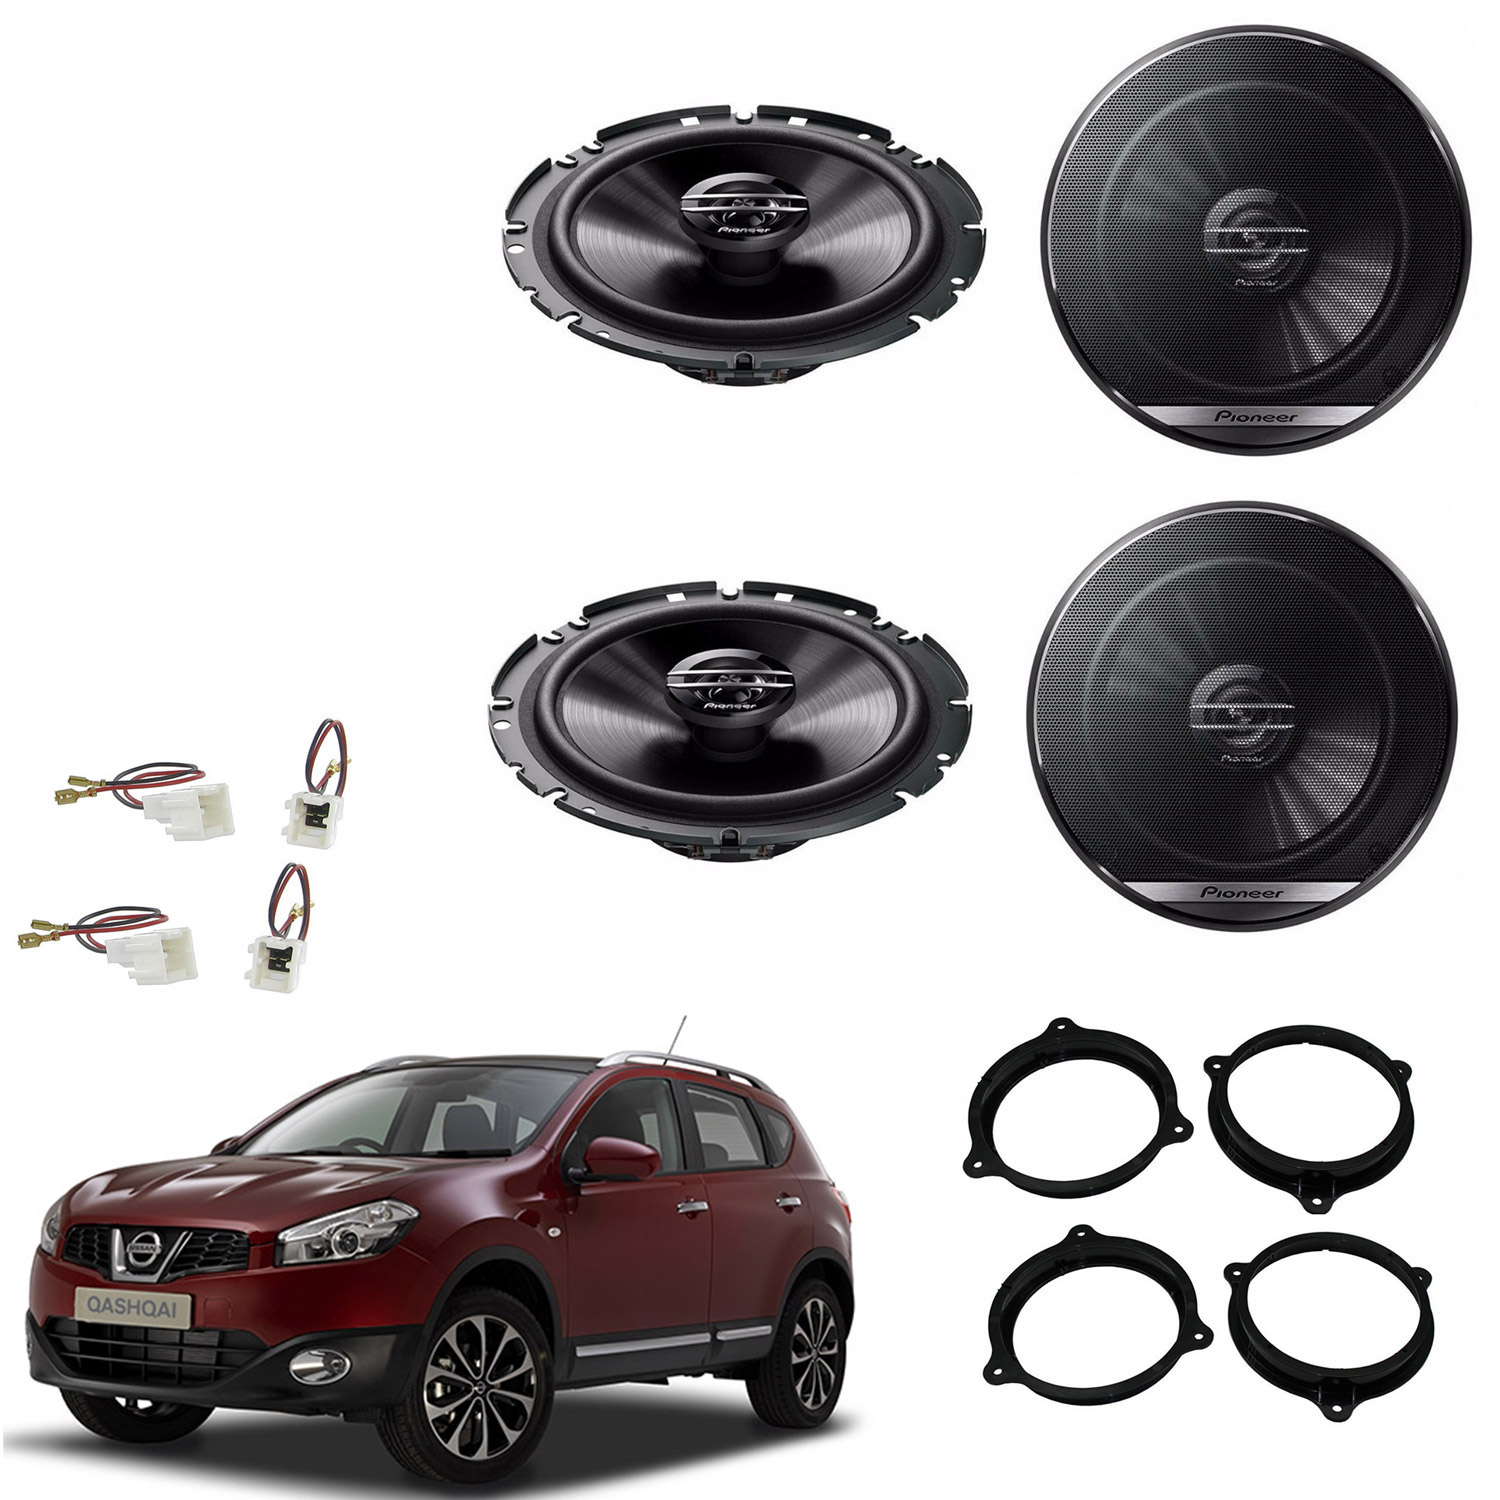 Nissan Qashqai J10 2007 - 2012 Pioneer Front and Rear Speaker